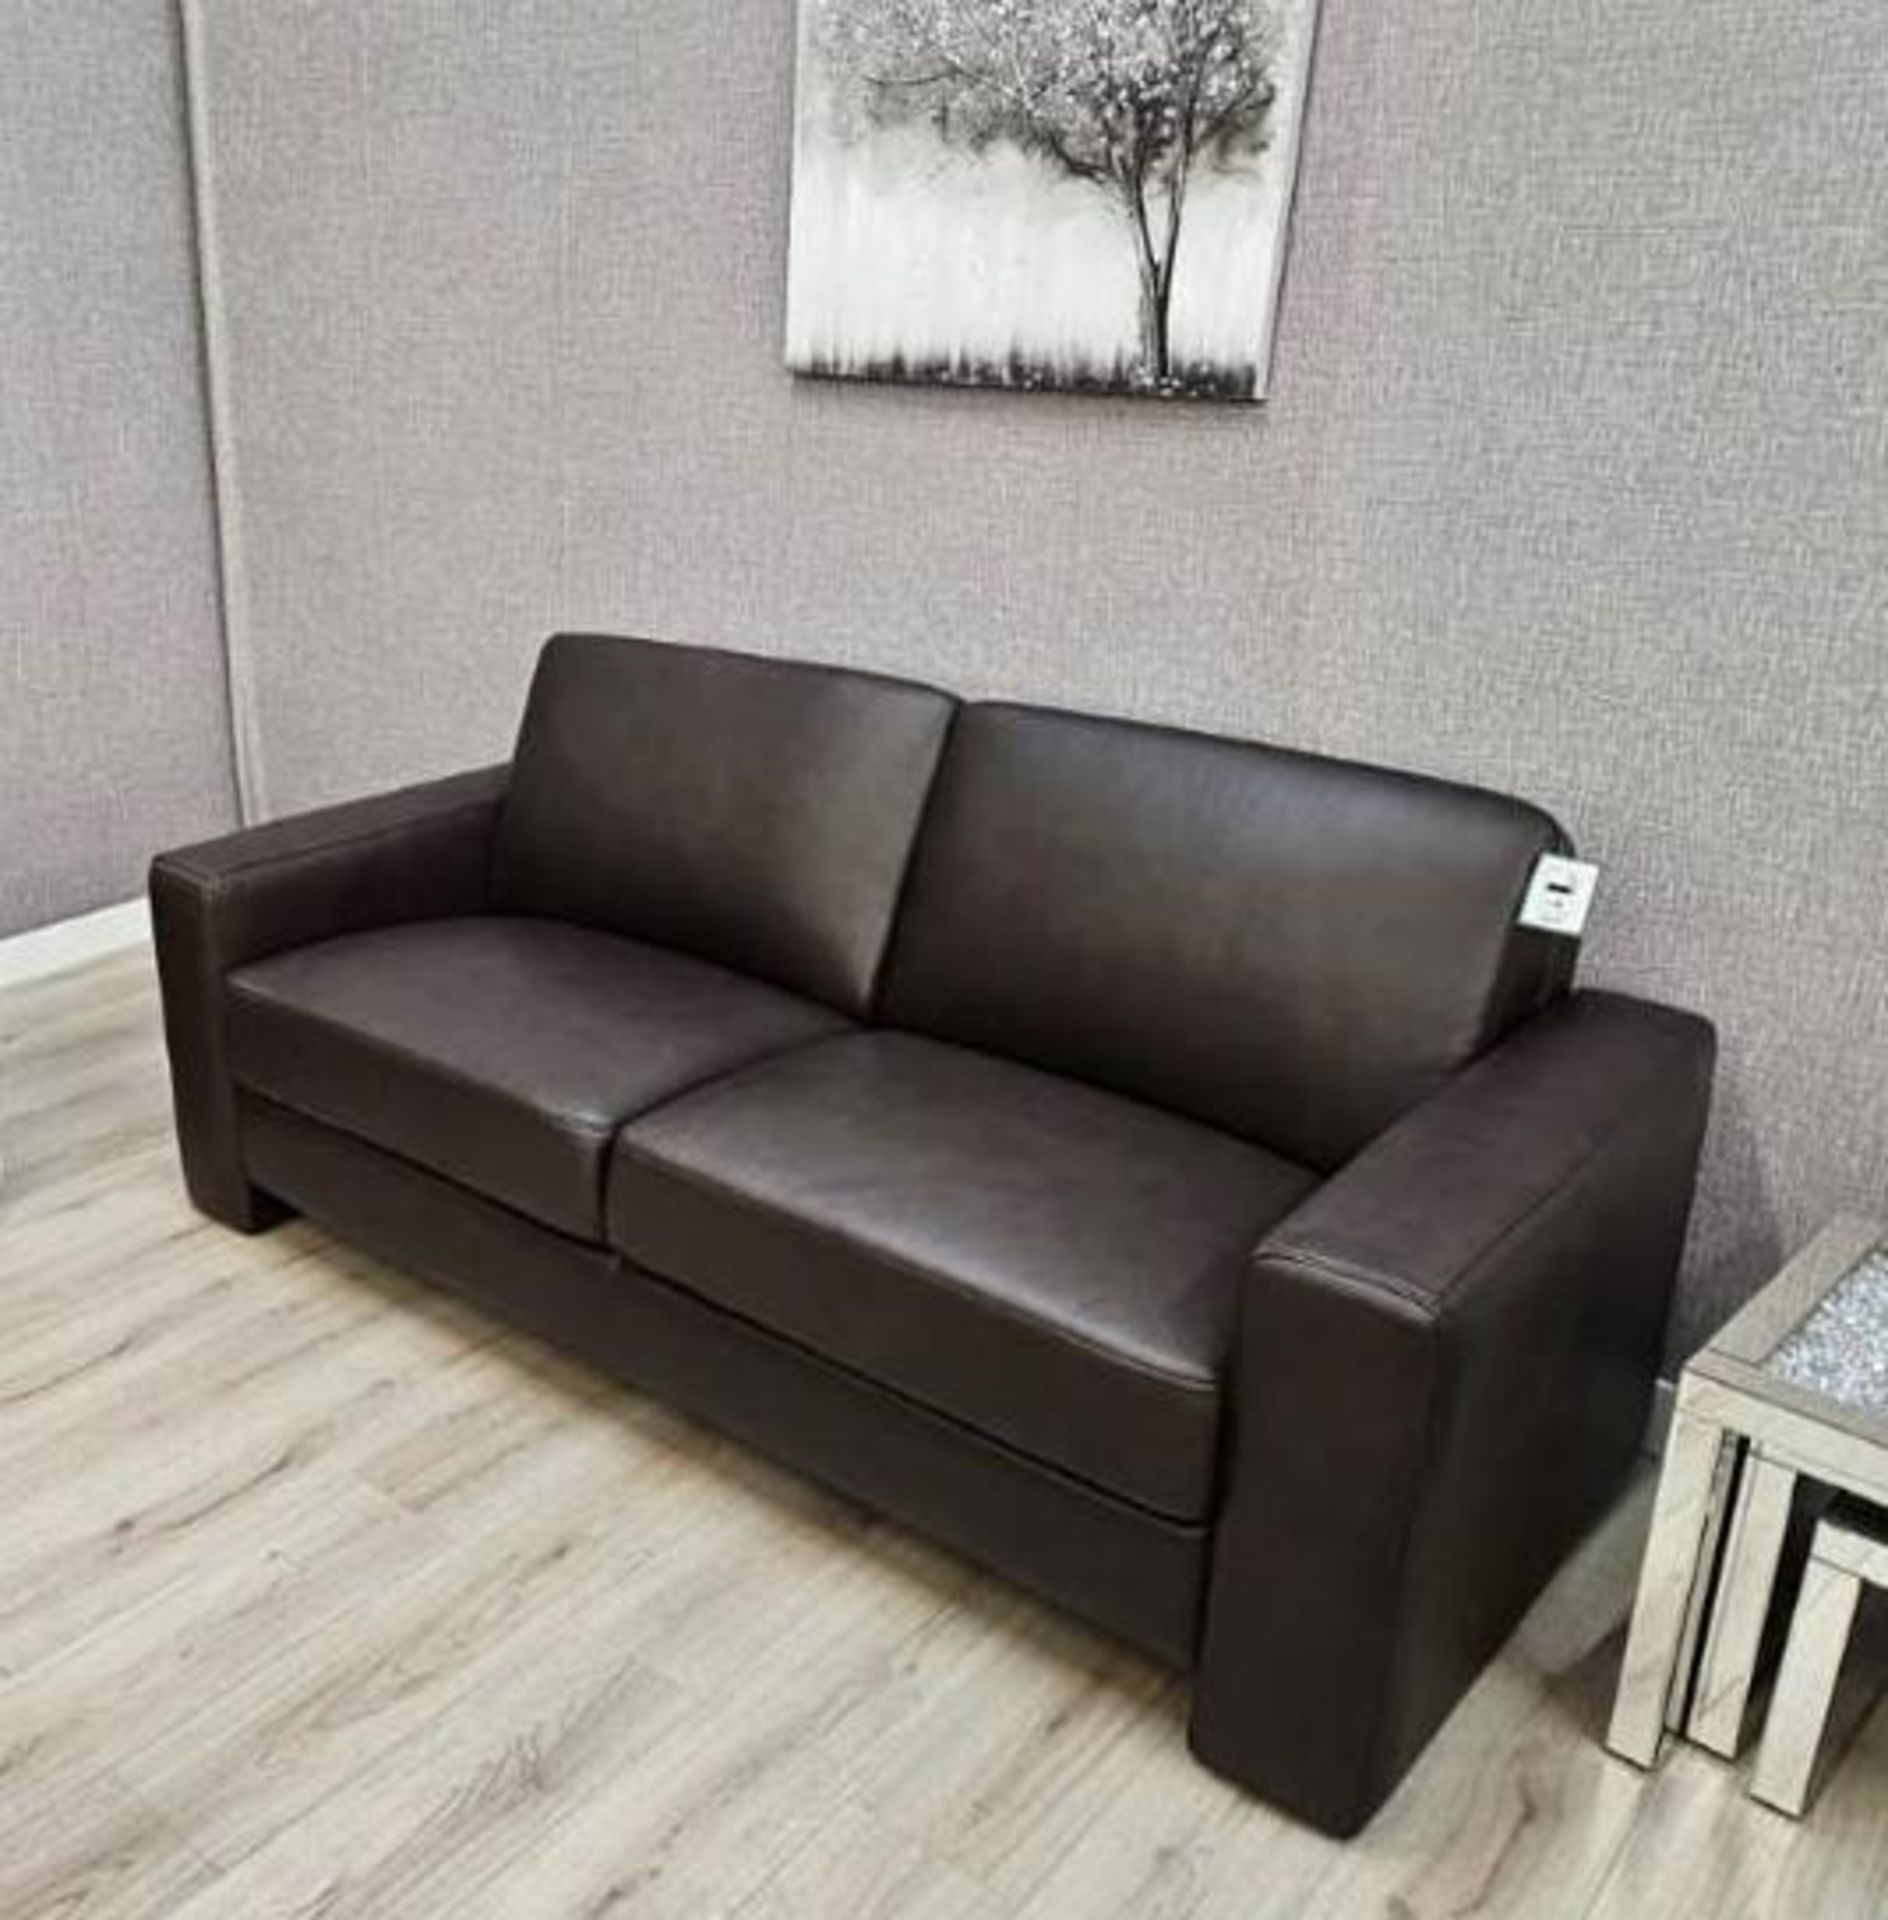 Brand new & boxed ATS Boston 3 + 1 + 1 static leather suite in Chocolate.